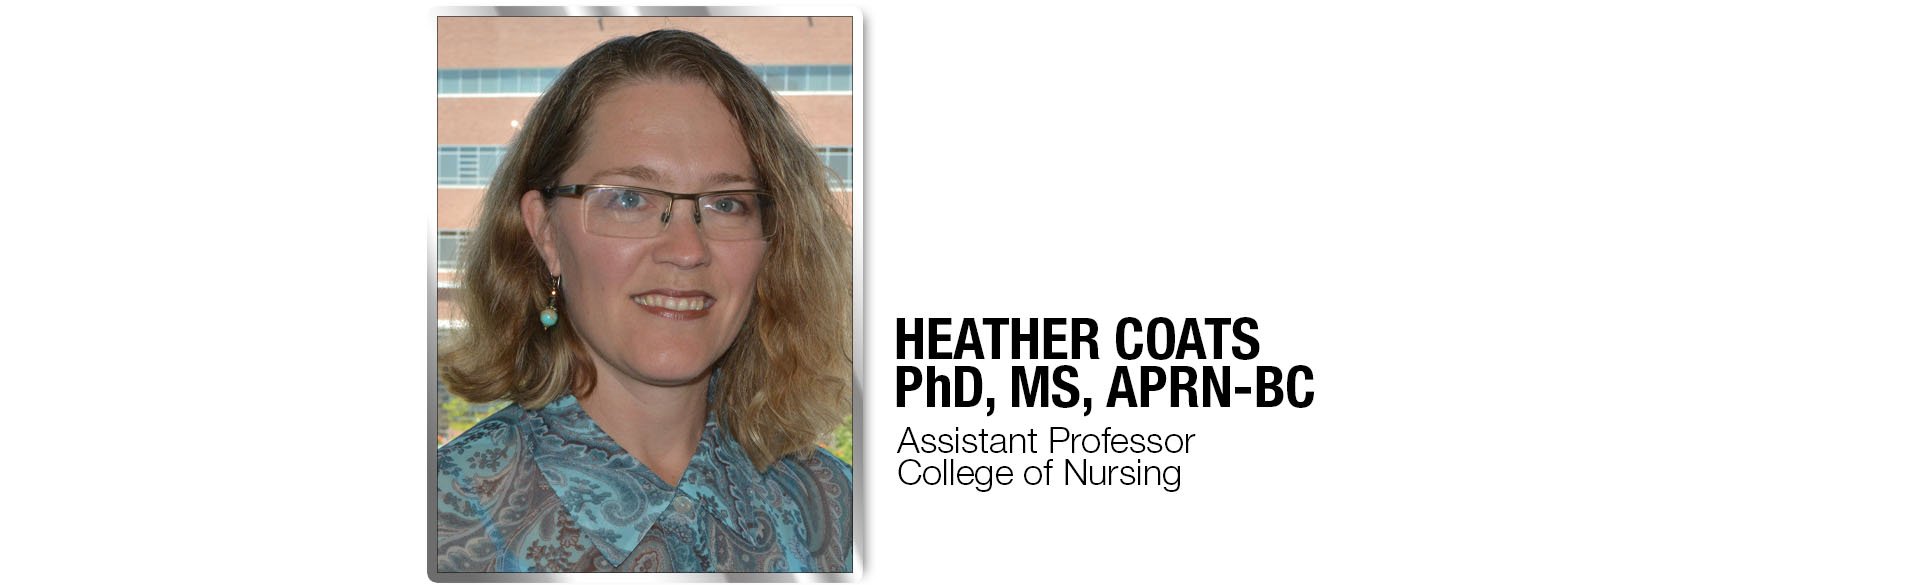 Heater Coats, PhD, MS, APRN-BC Assistant Proffesor